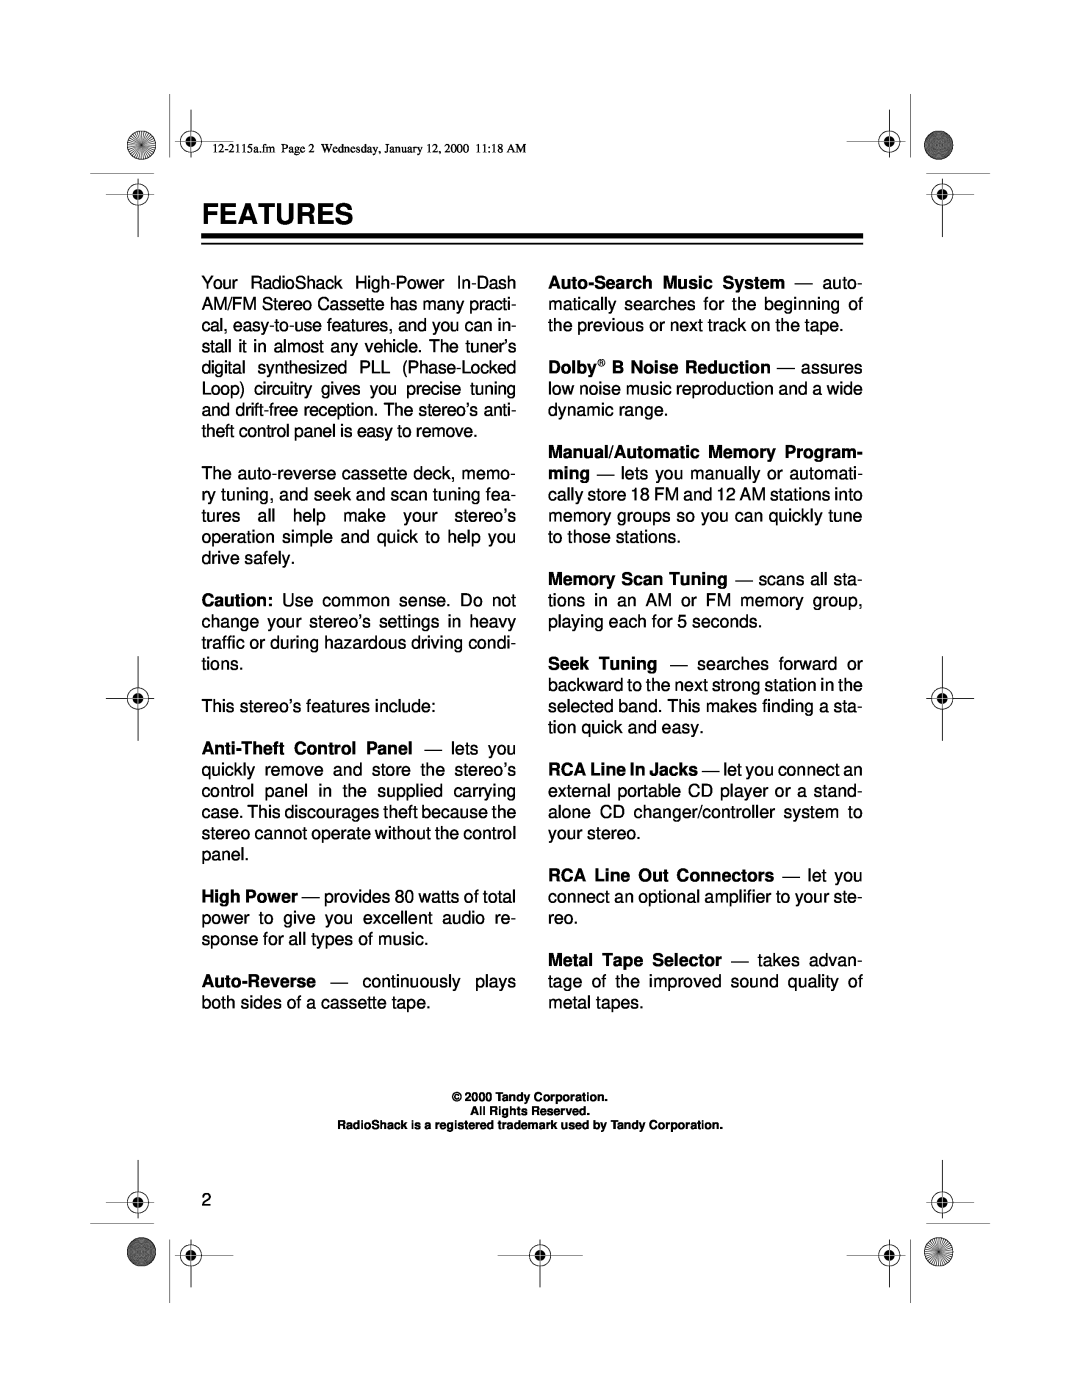 Radio Shack AM/FM Stereo Cassette owner manual Features 